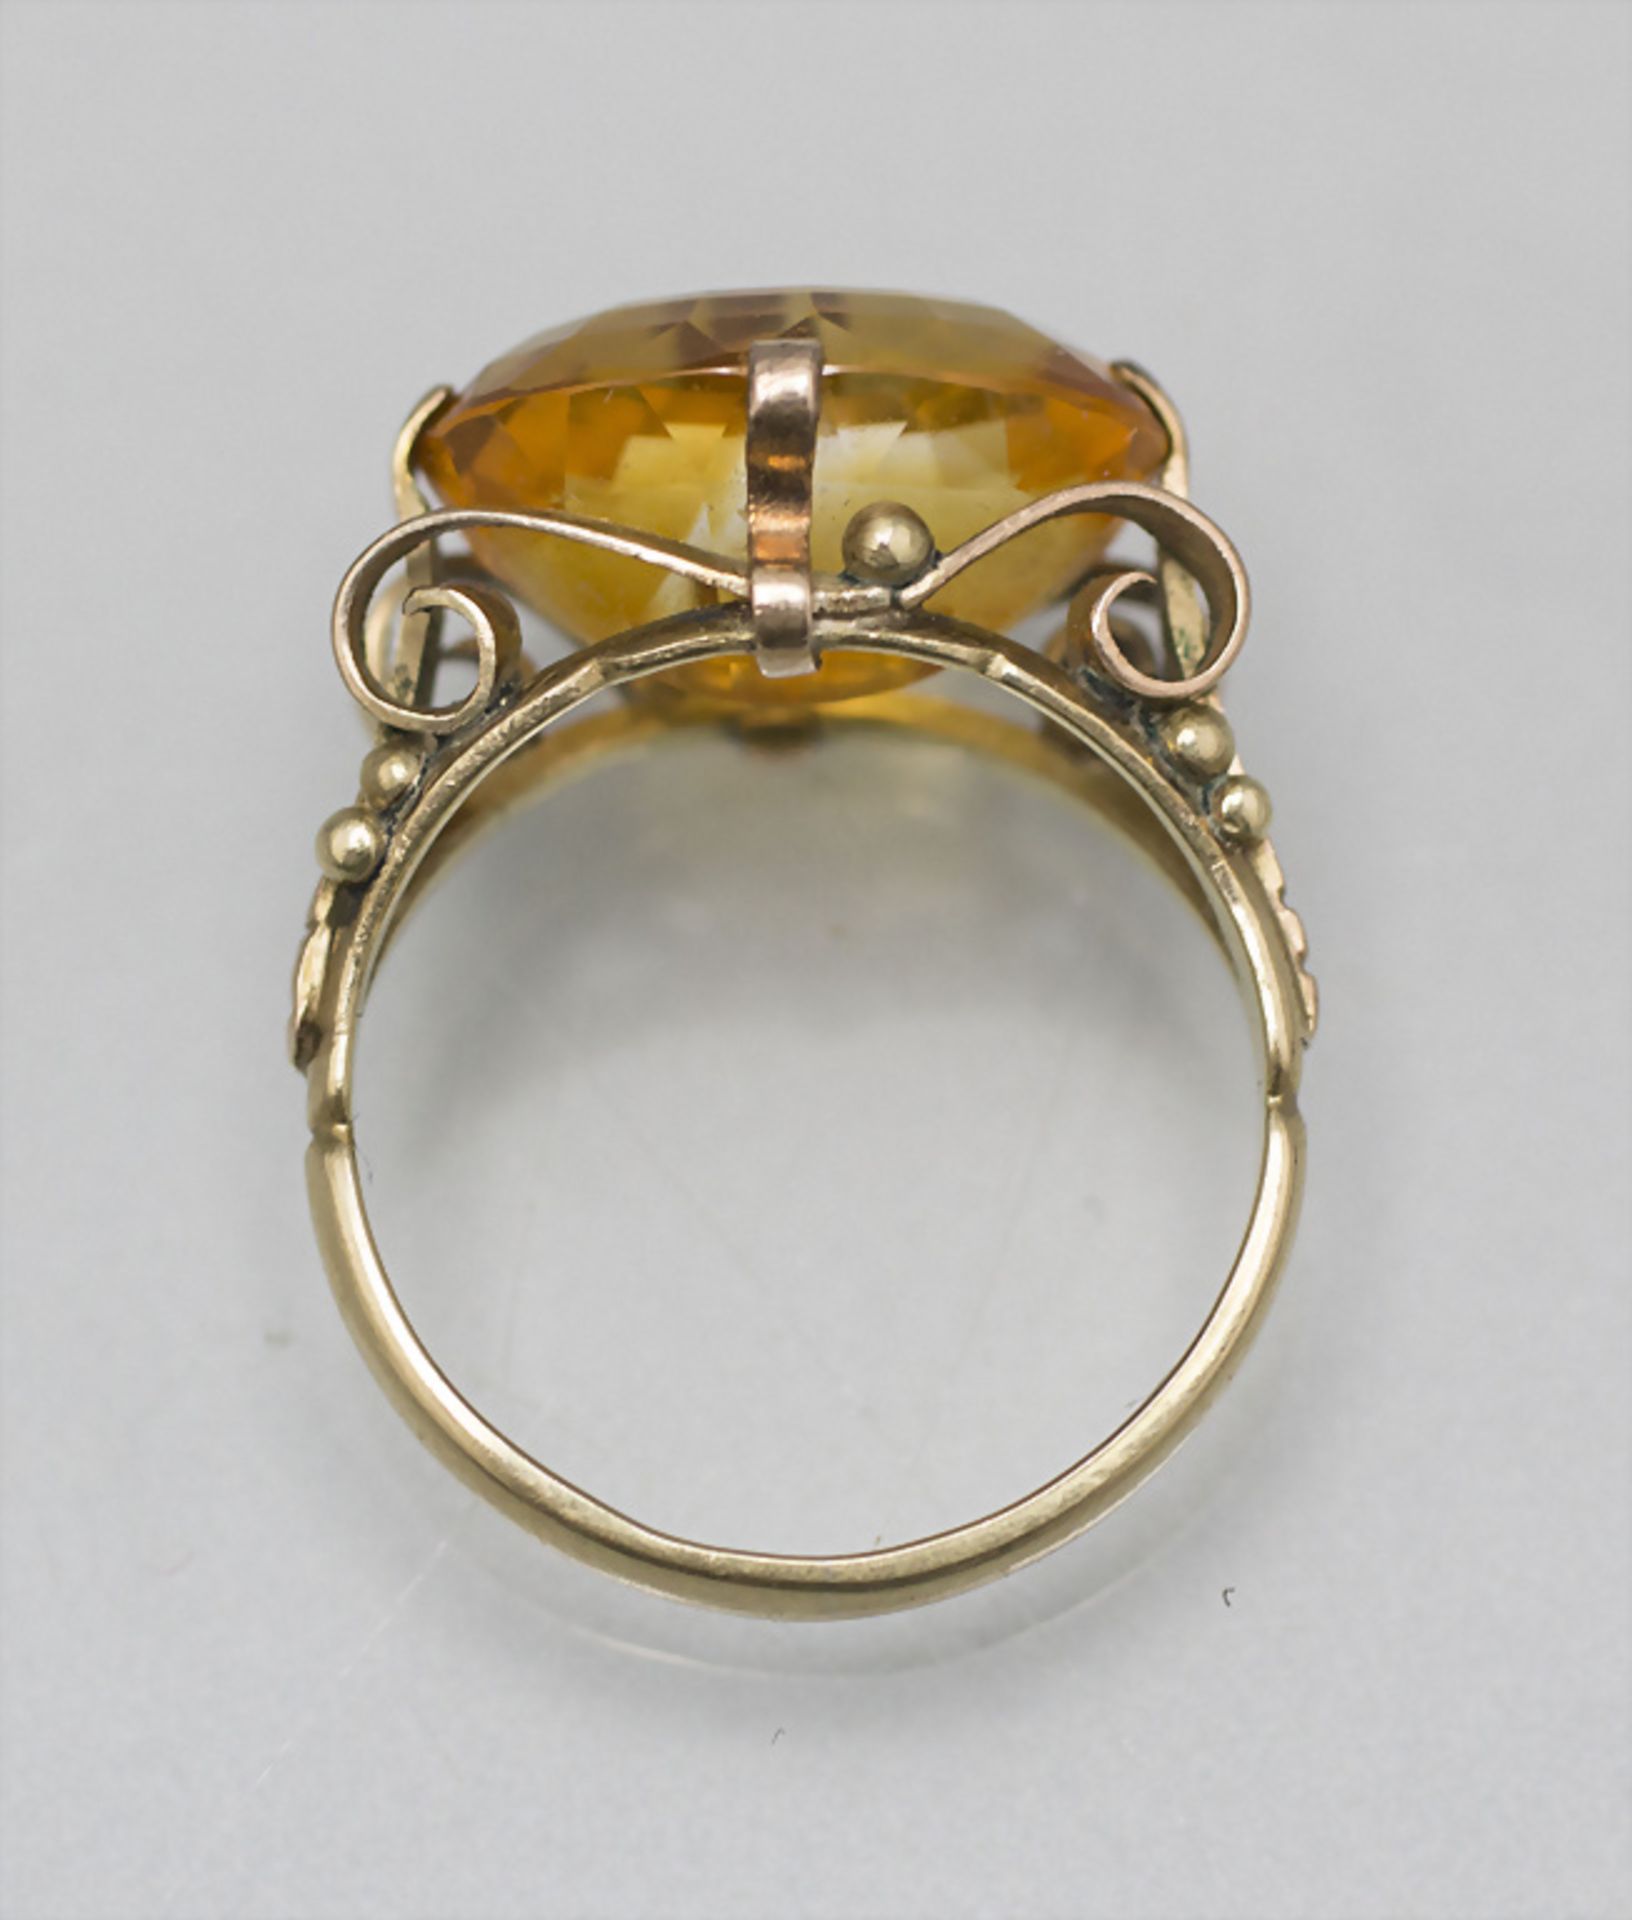 Damenring mit Citrin / A ladies 14 ct gold ring with citrine - Image 3 of 3